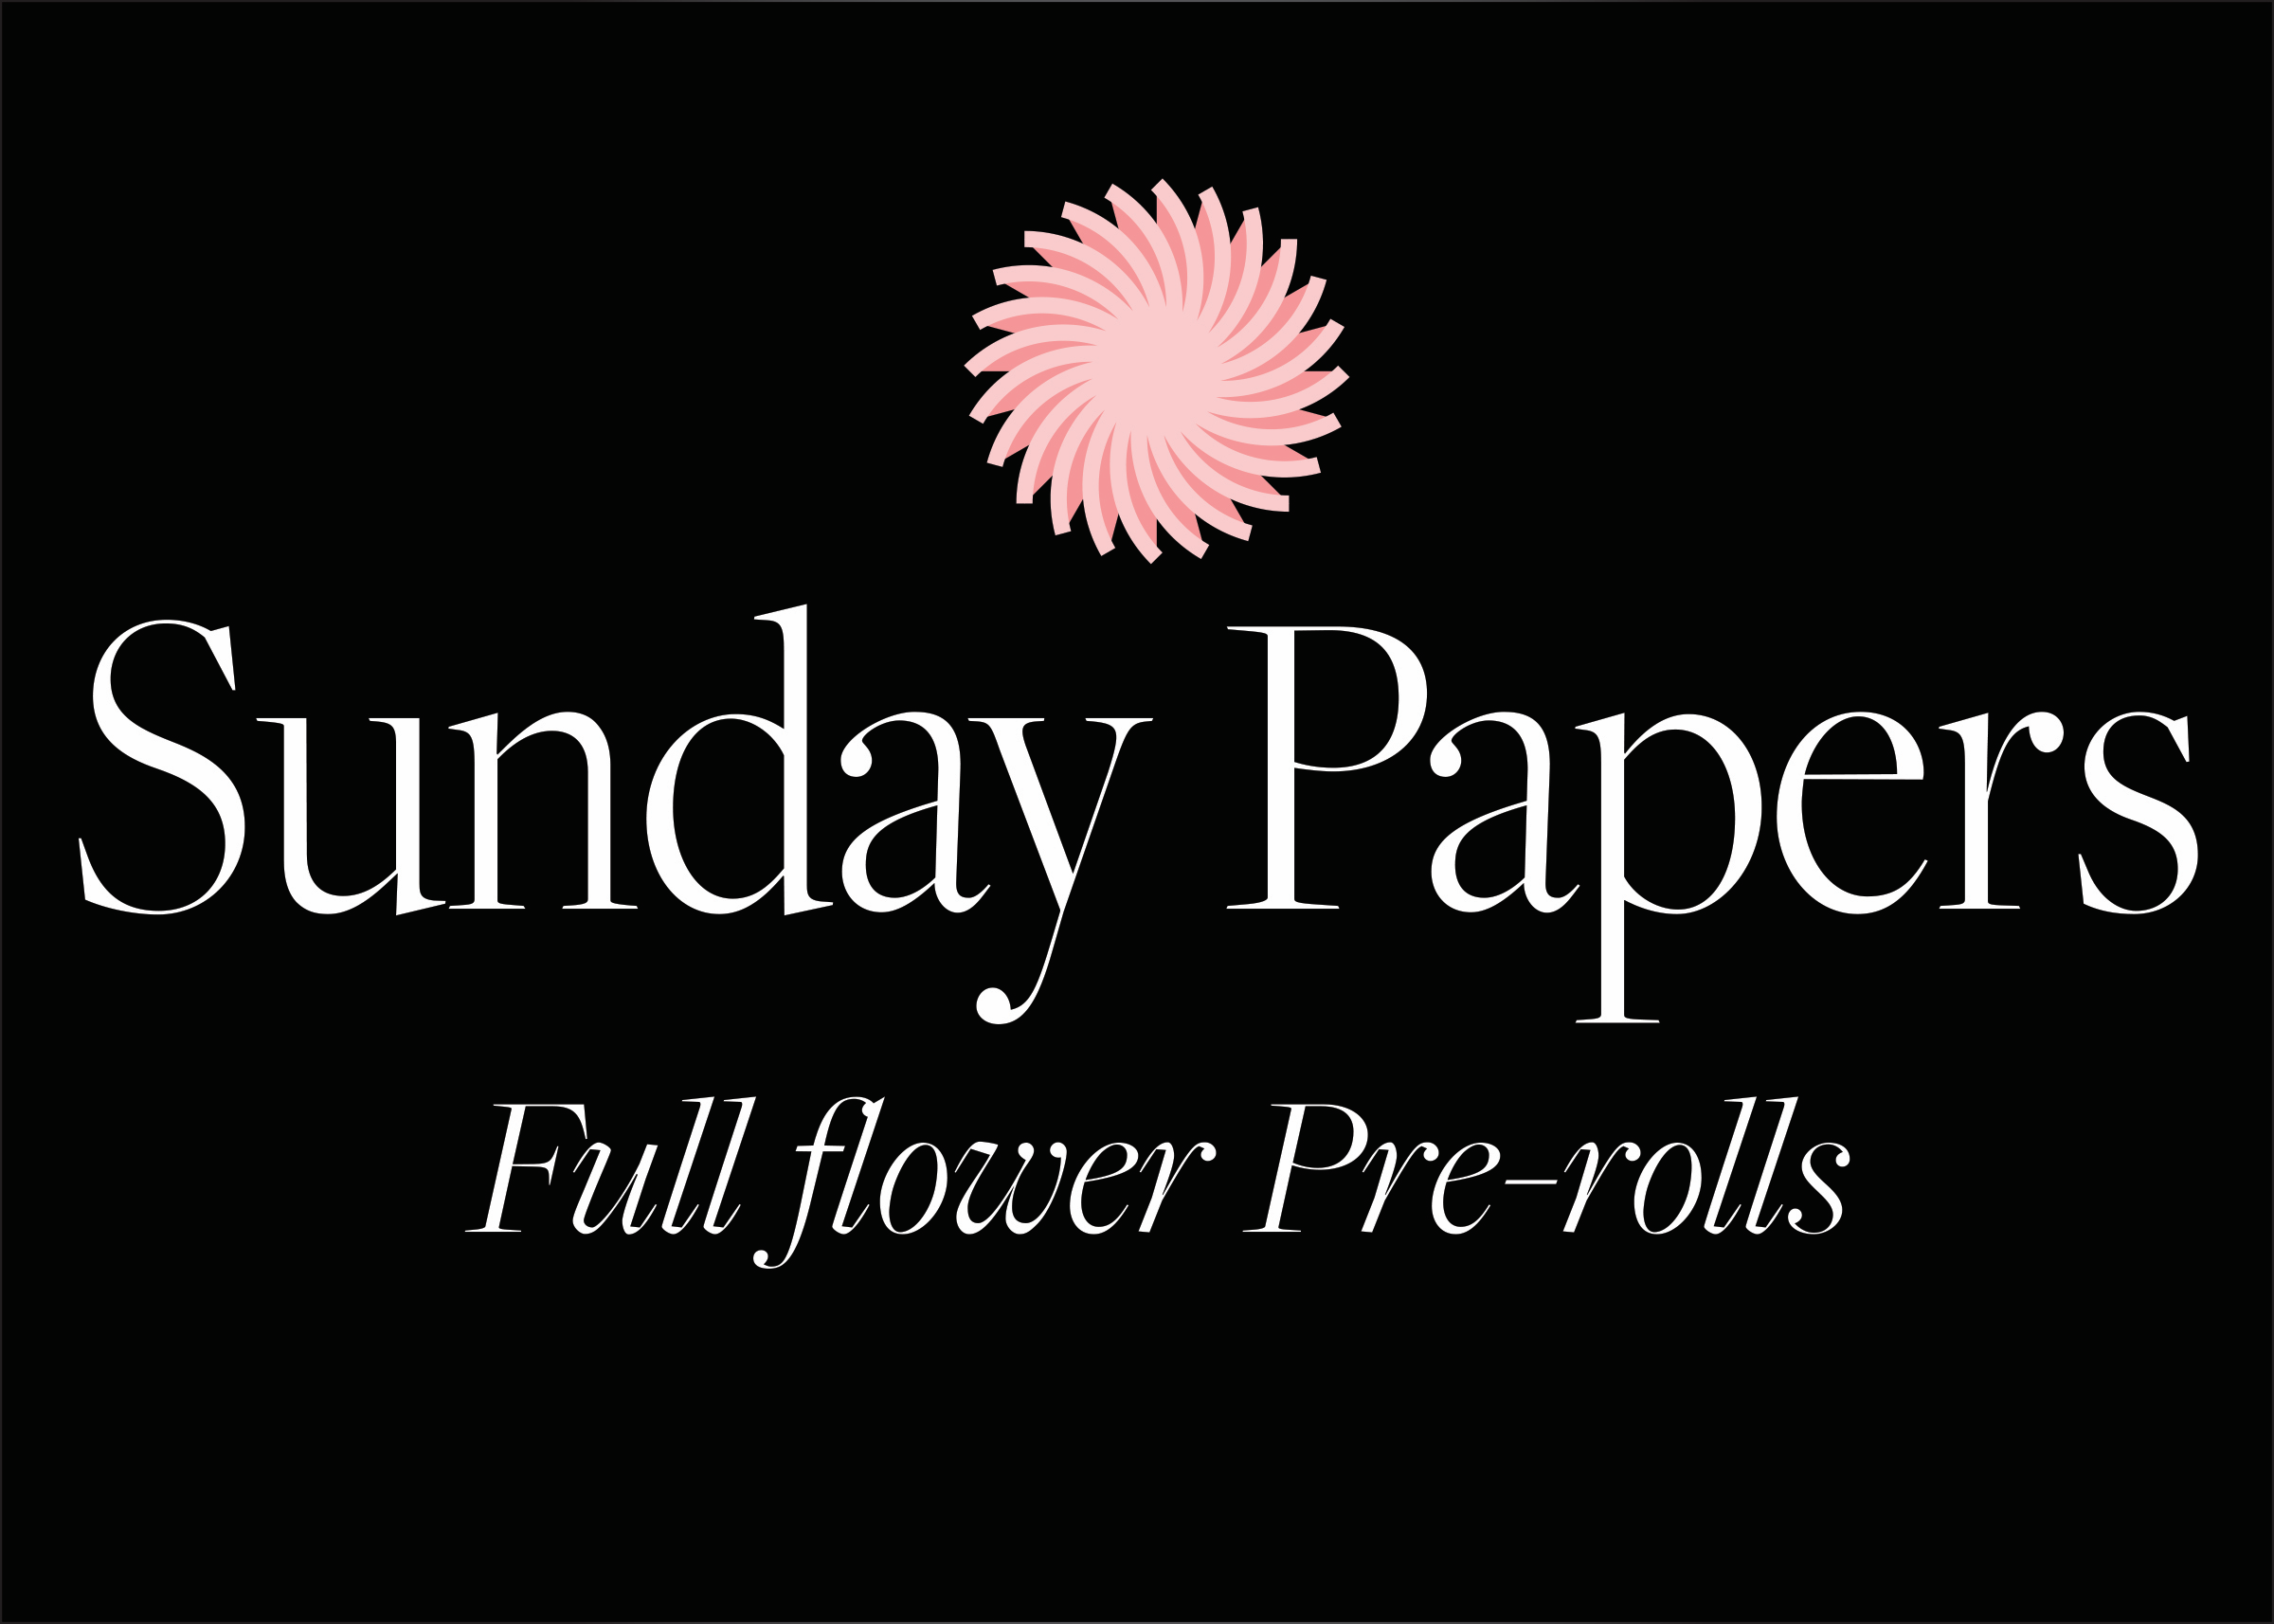 Sunday Papers Cannabis Brand Logo